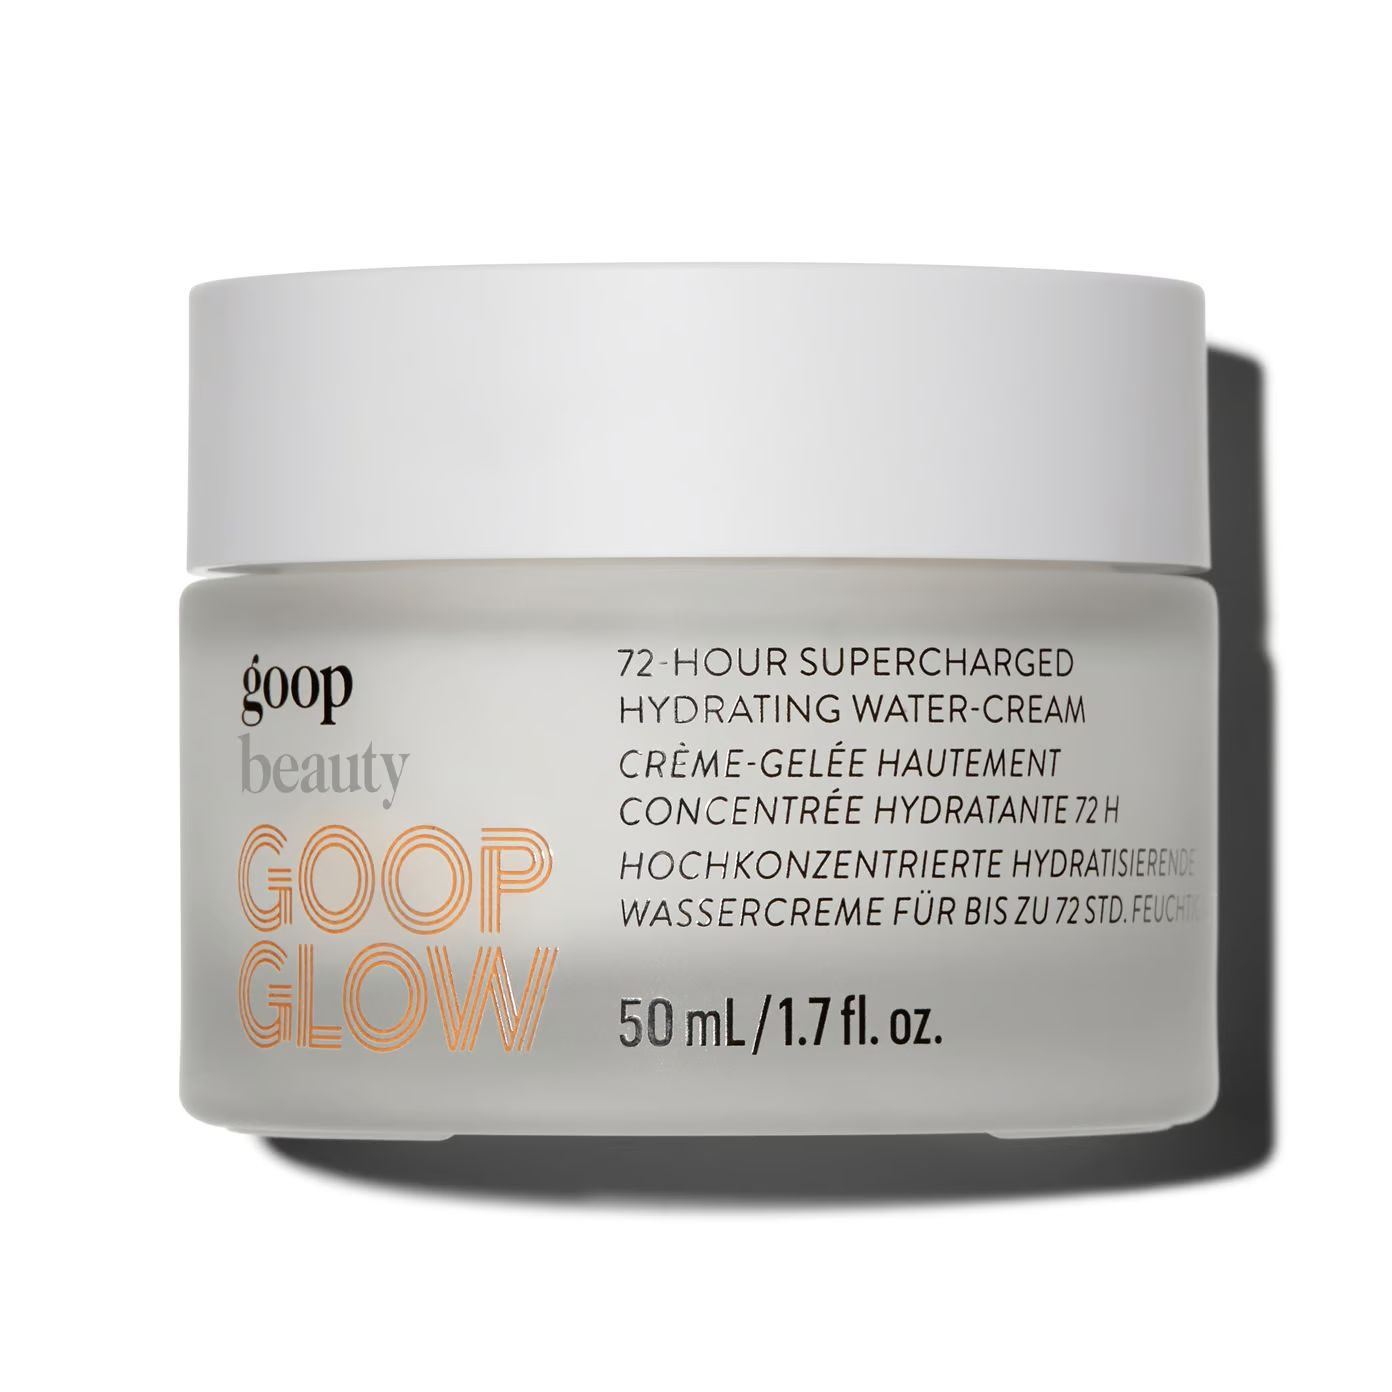 72-Hour Supercharged Hydrating Water-Cream | goop